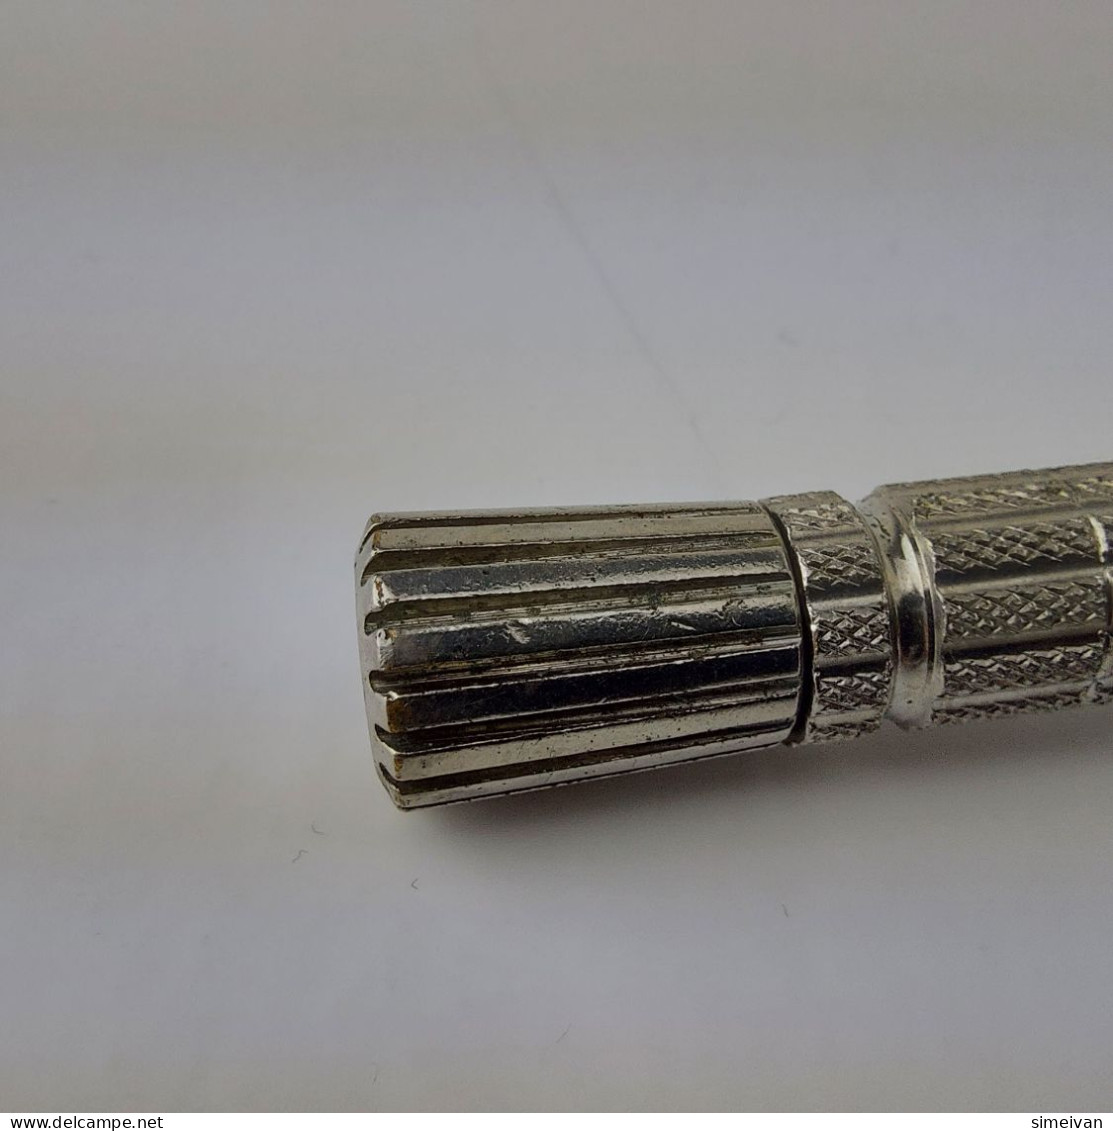 Gillette Flare Tip Super Speed 1960 Made in USA F4 Safety Razor Double Edge #5433